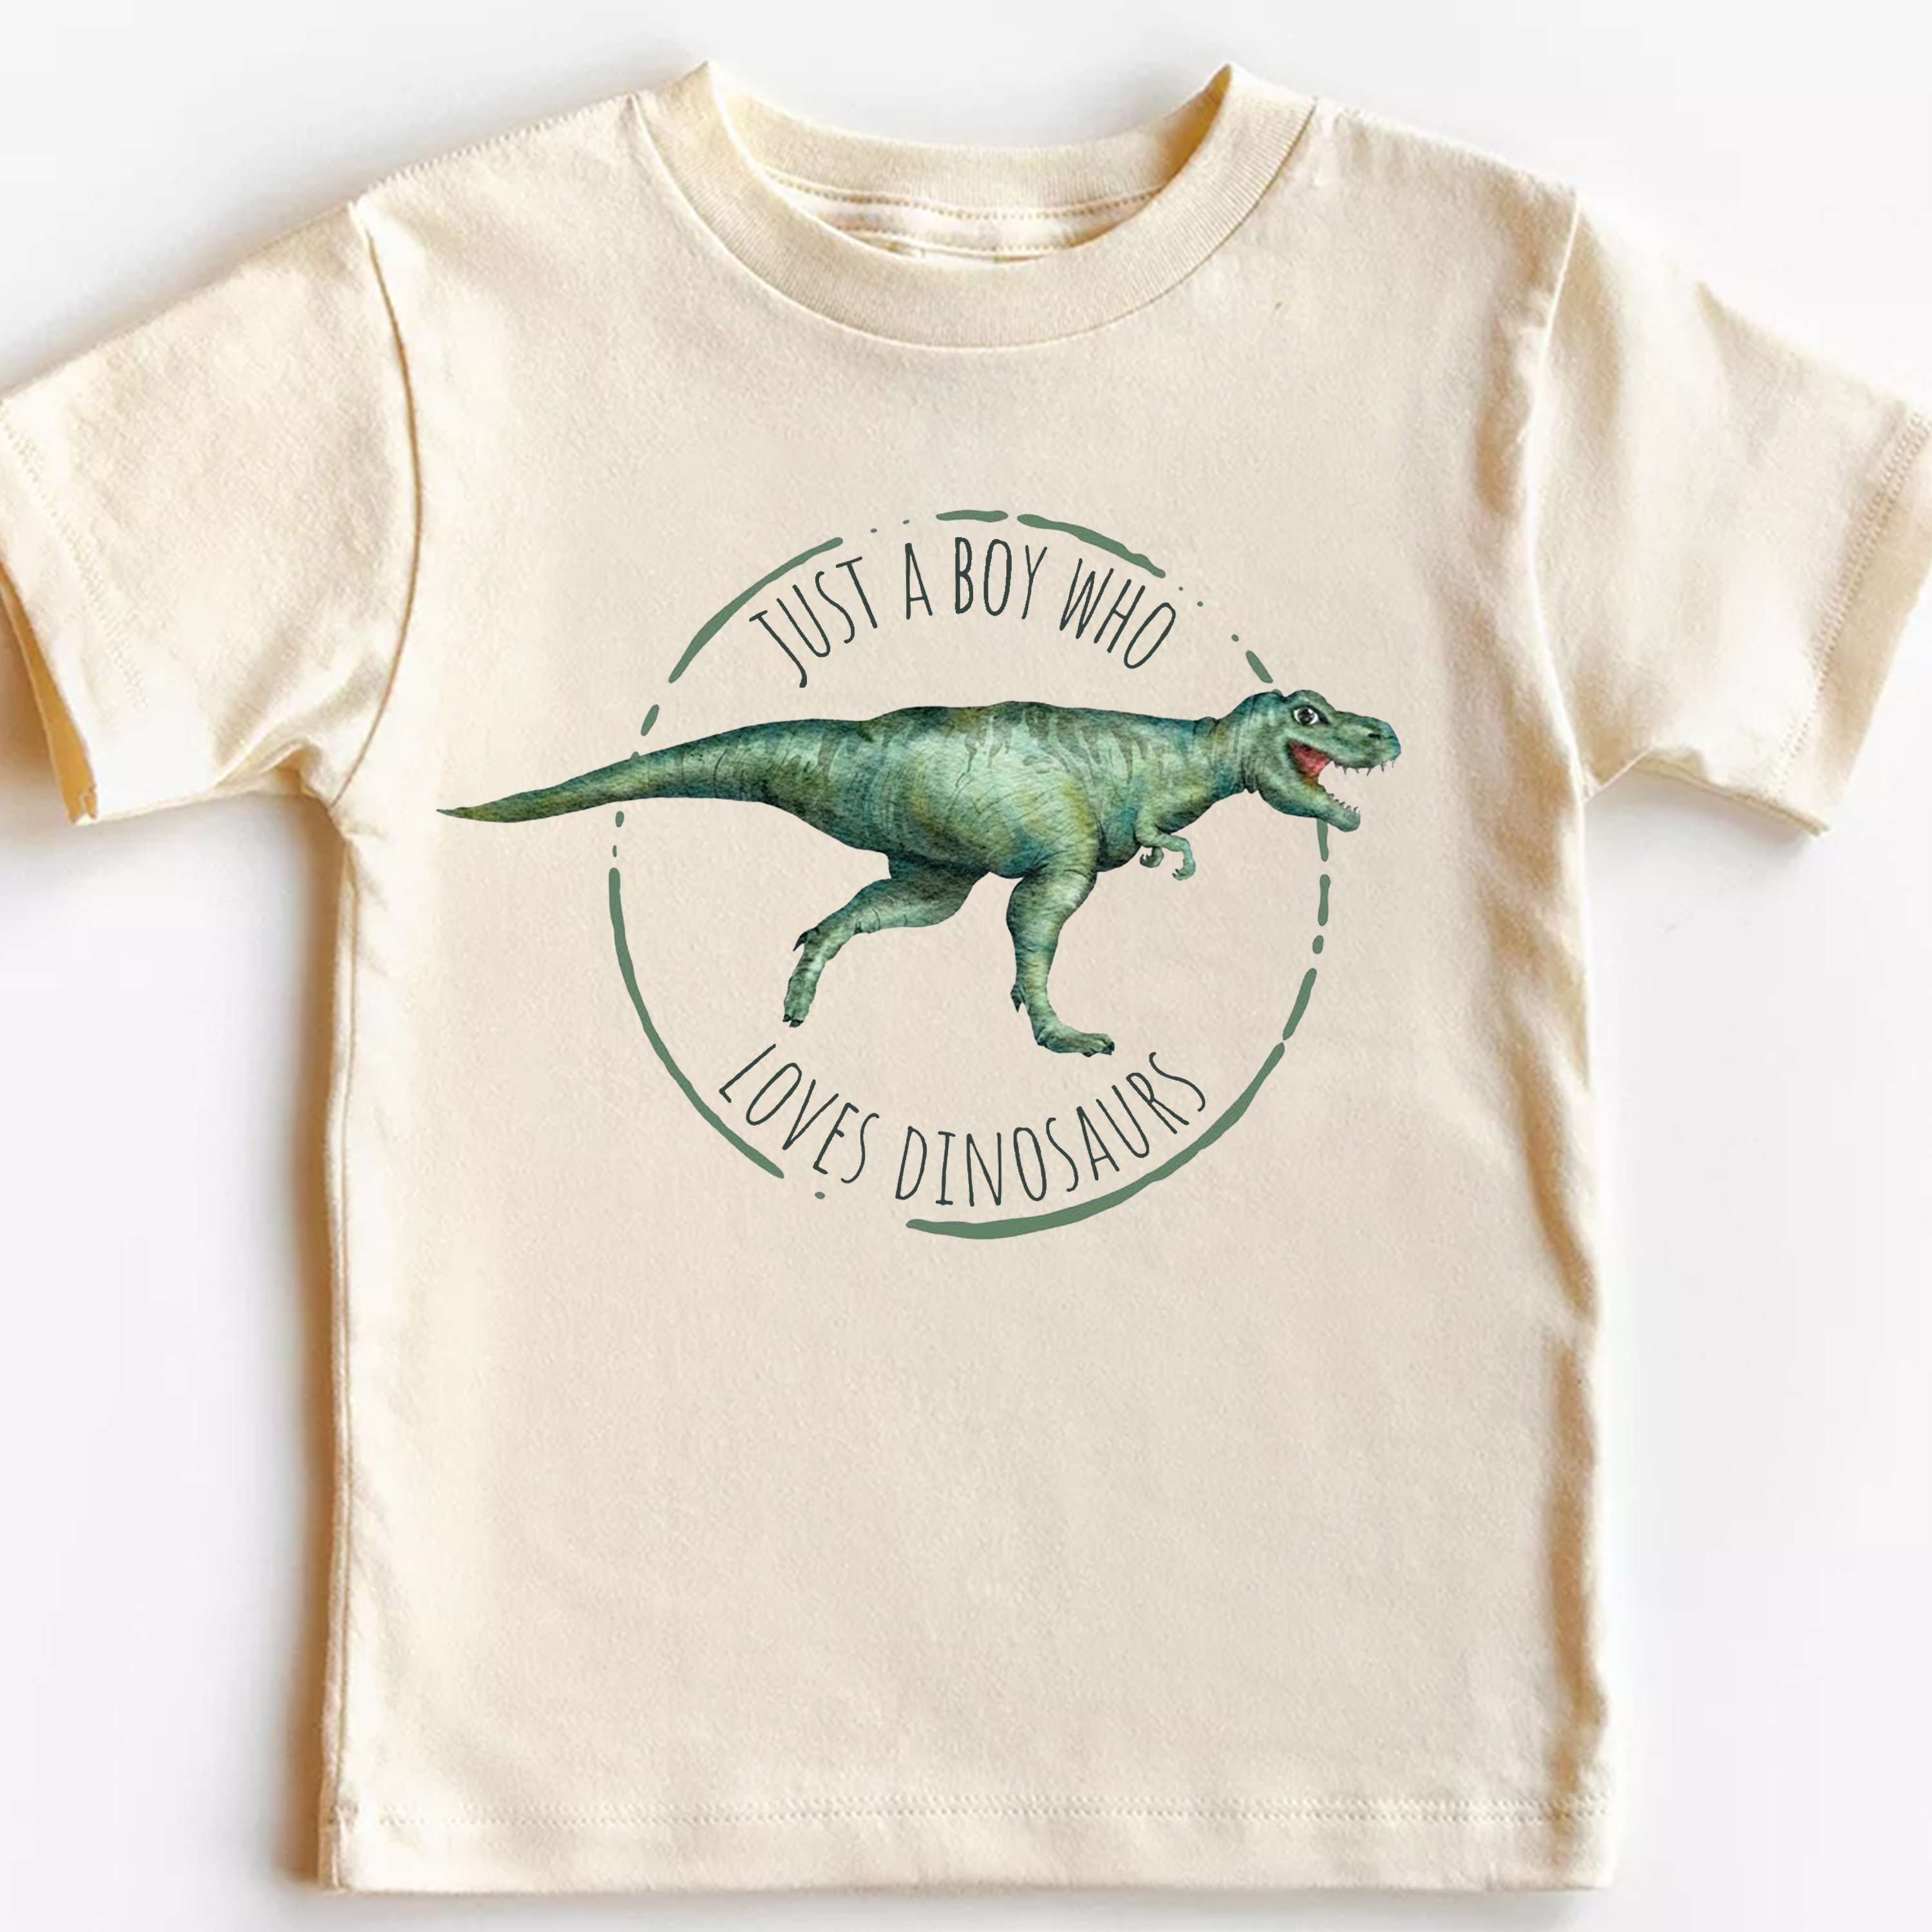 Just A Boy Who Loves Dinosaurs Kids Shirt